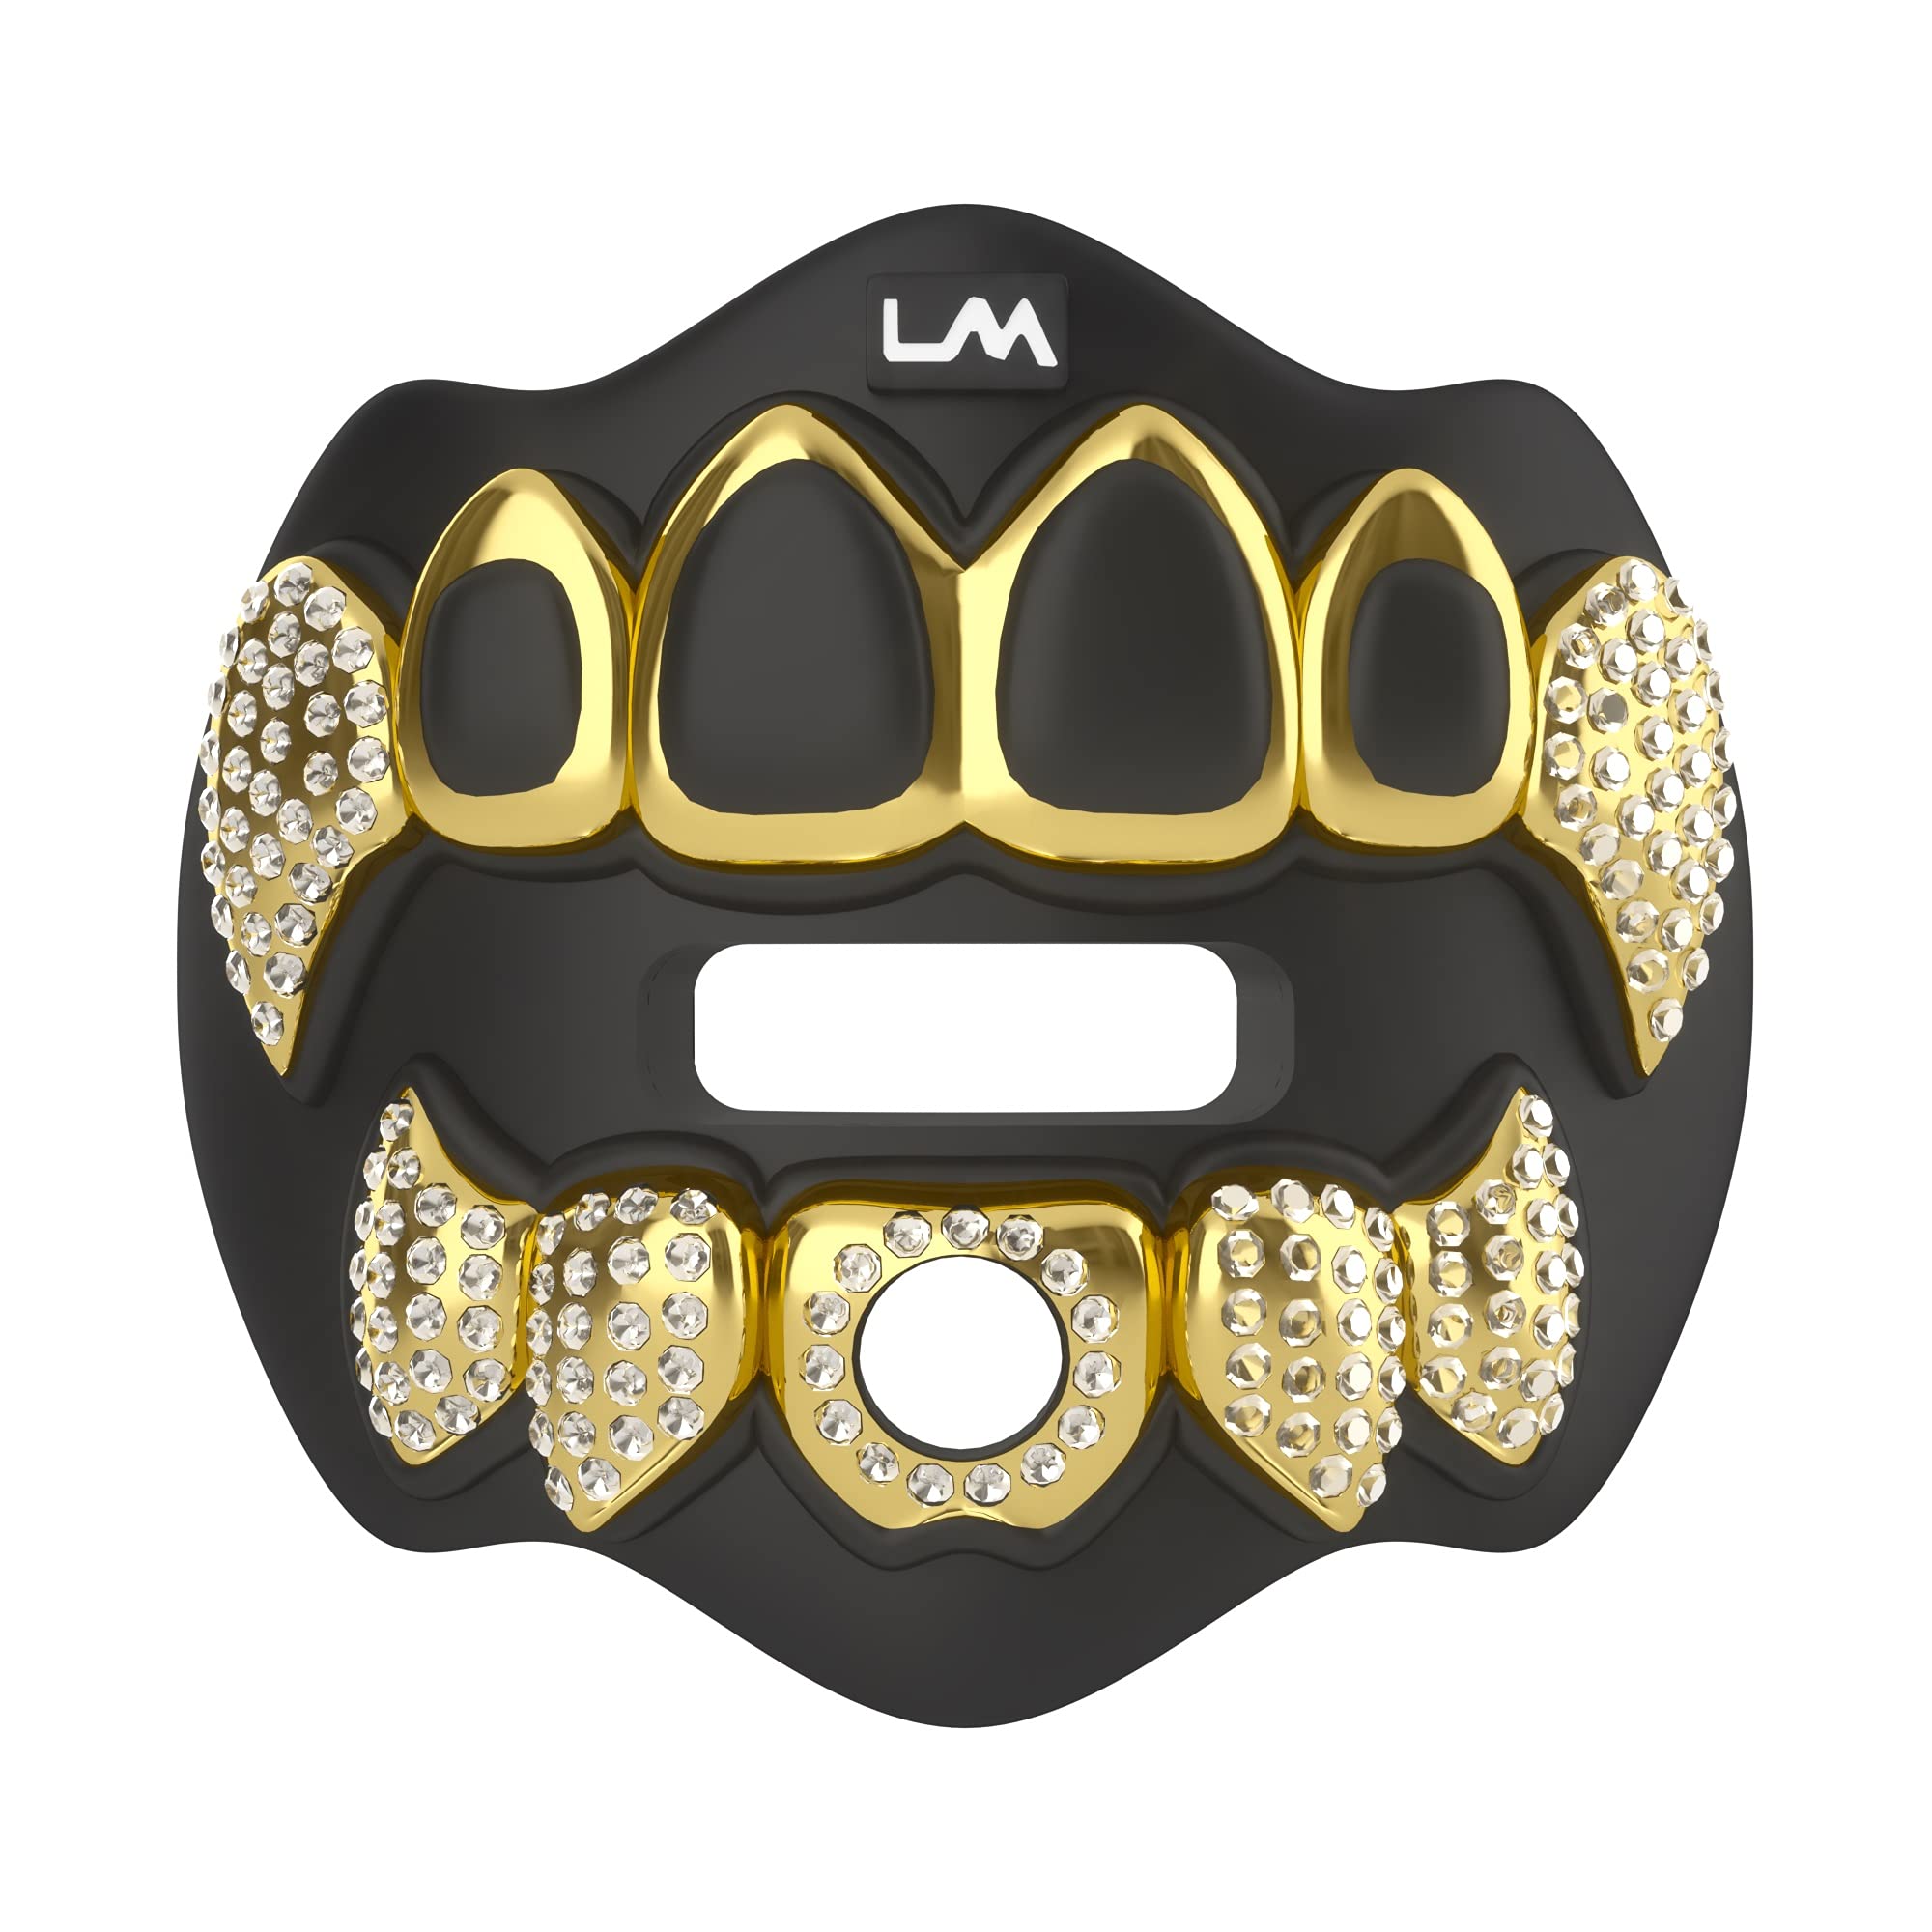 Loudmouth Football Mouth Guard  3D Chrome Grillz Adult & Youth